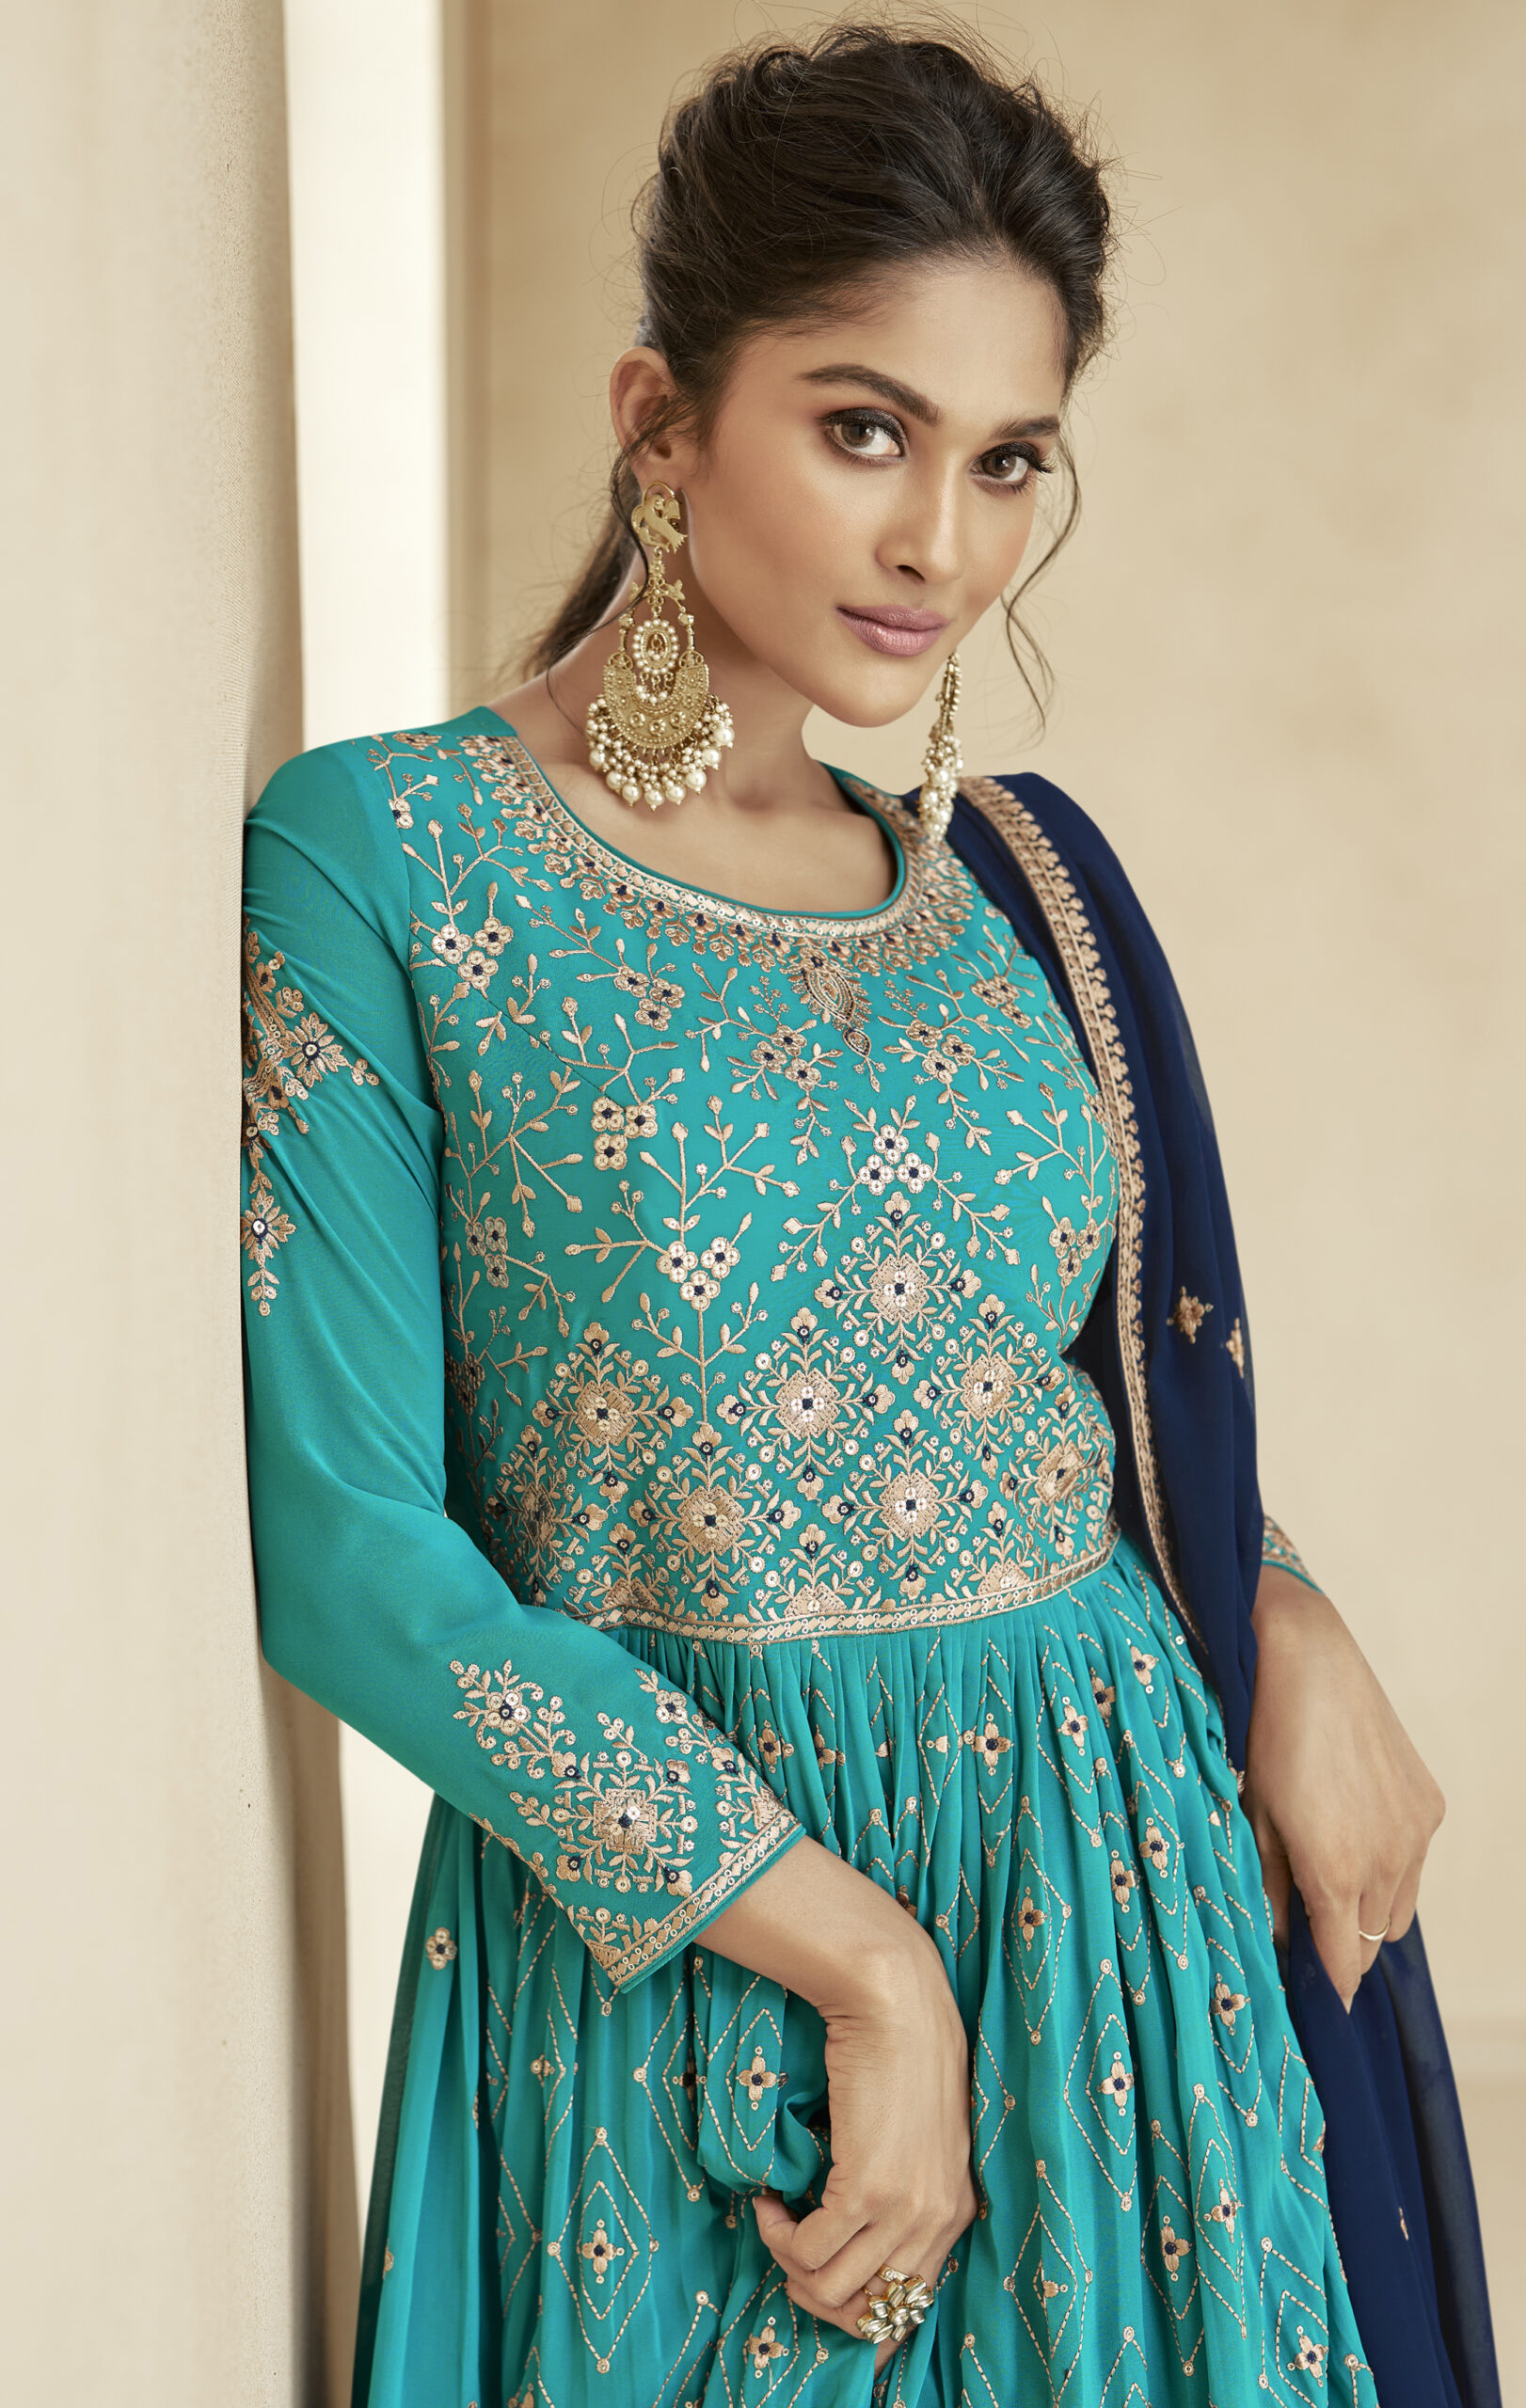 Lehenga Choli From Our Online & Offline Store – Roop Sari Palace